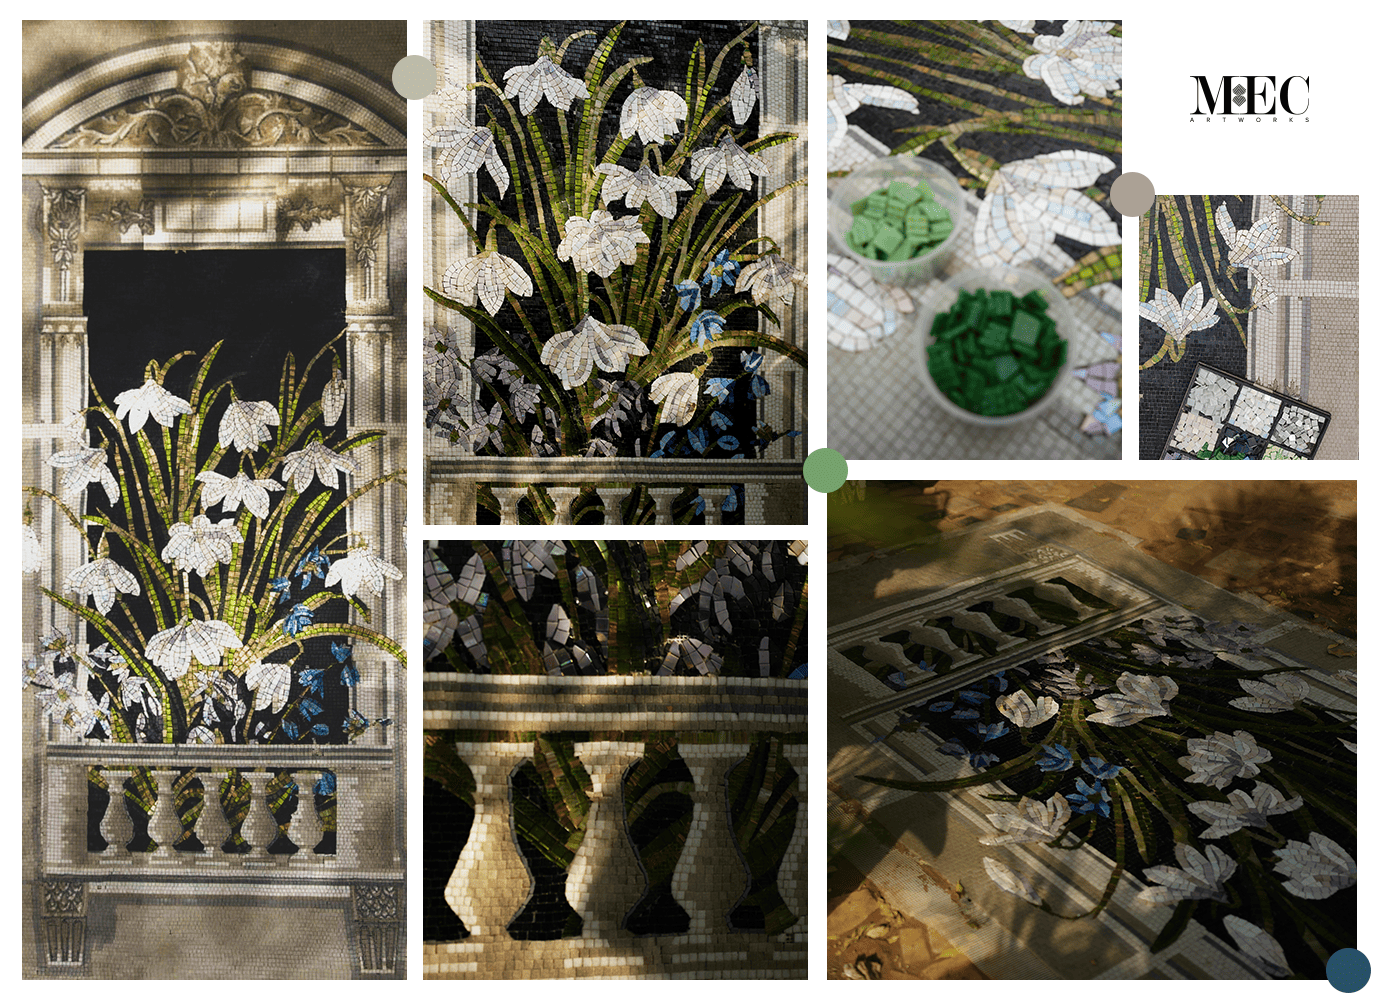 A detailed mosaic artwork depicting white flowers and green leaves set within architectural wall niches, accompanied by close-up views of the mosaic tiles and the intricate assembly process.